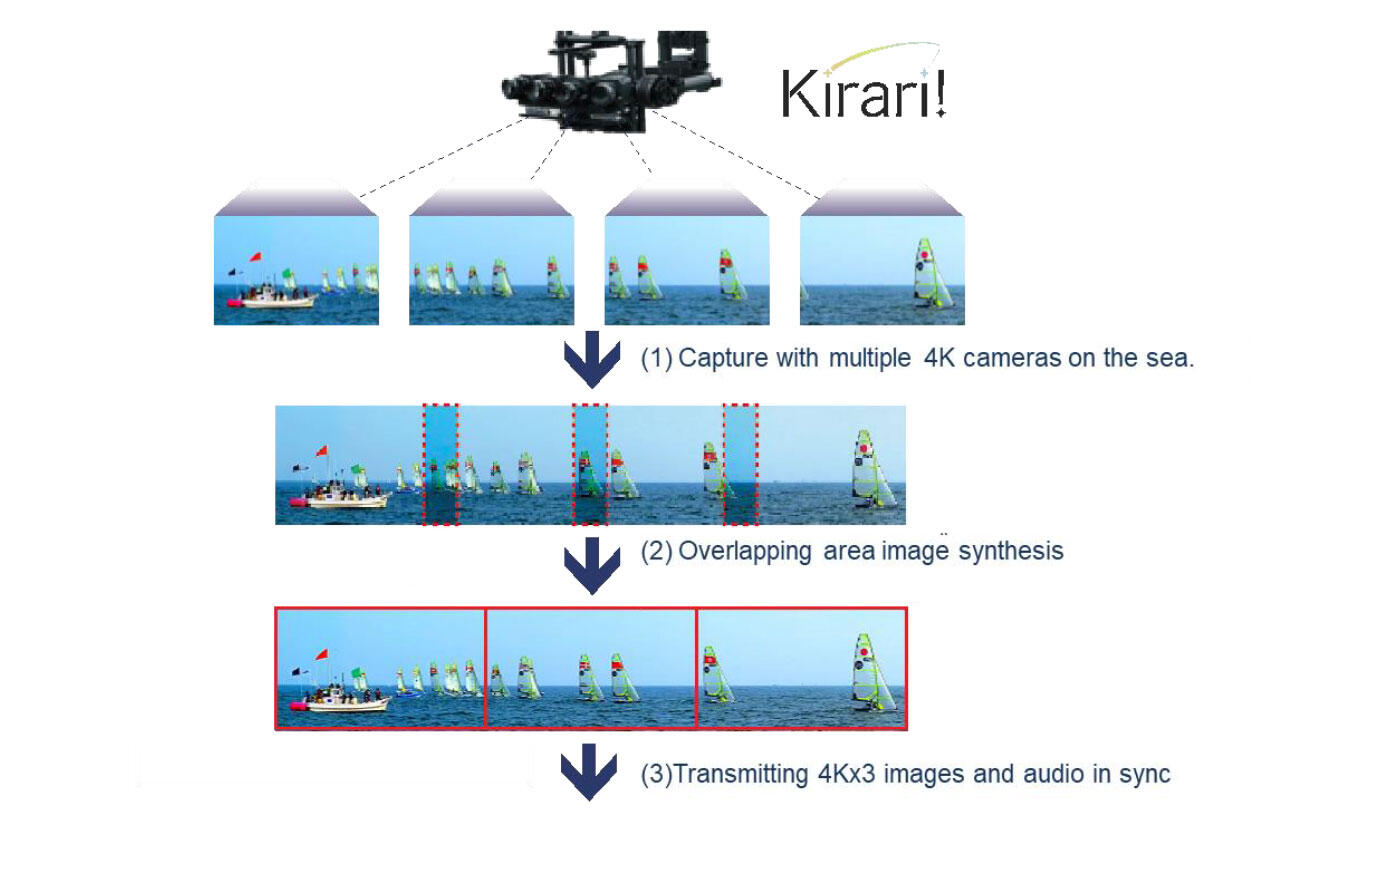 Fig. 3 Description of ultra-wide image synthesis technology